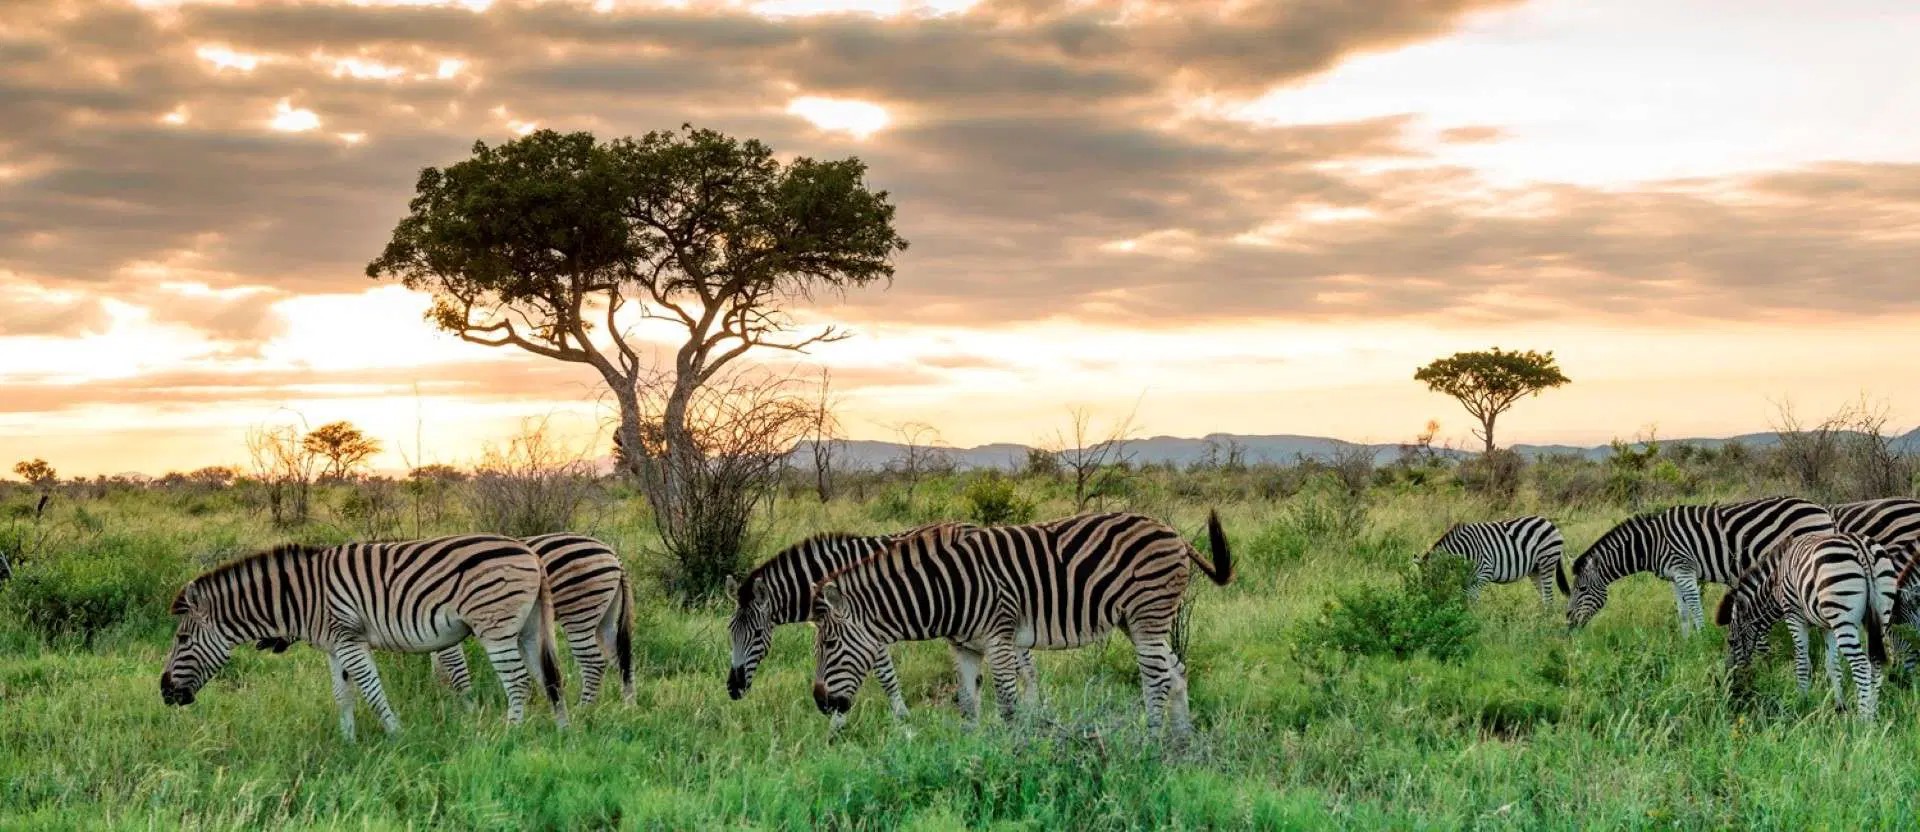 Photo of Zebras in South Africs